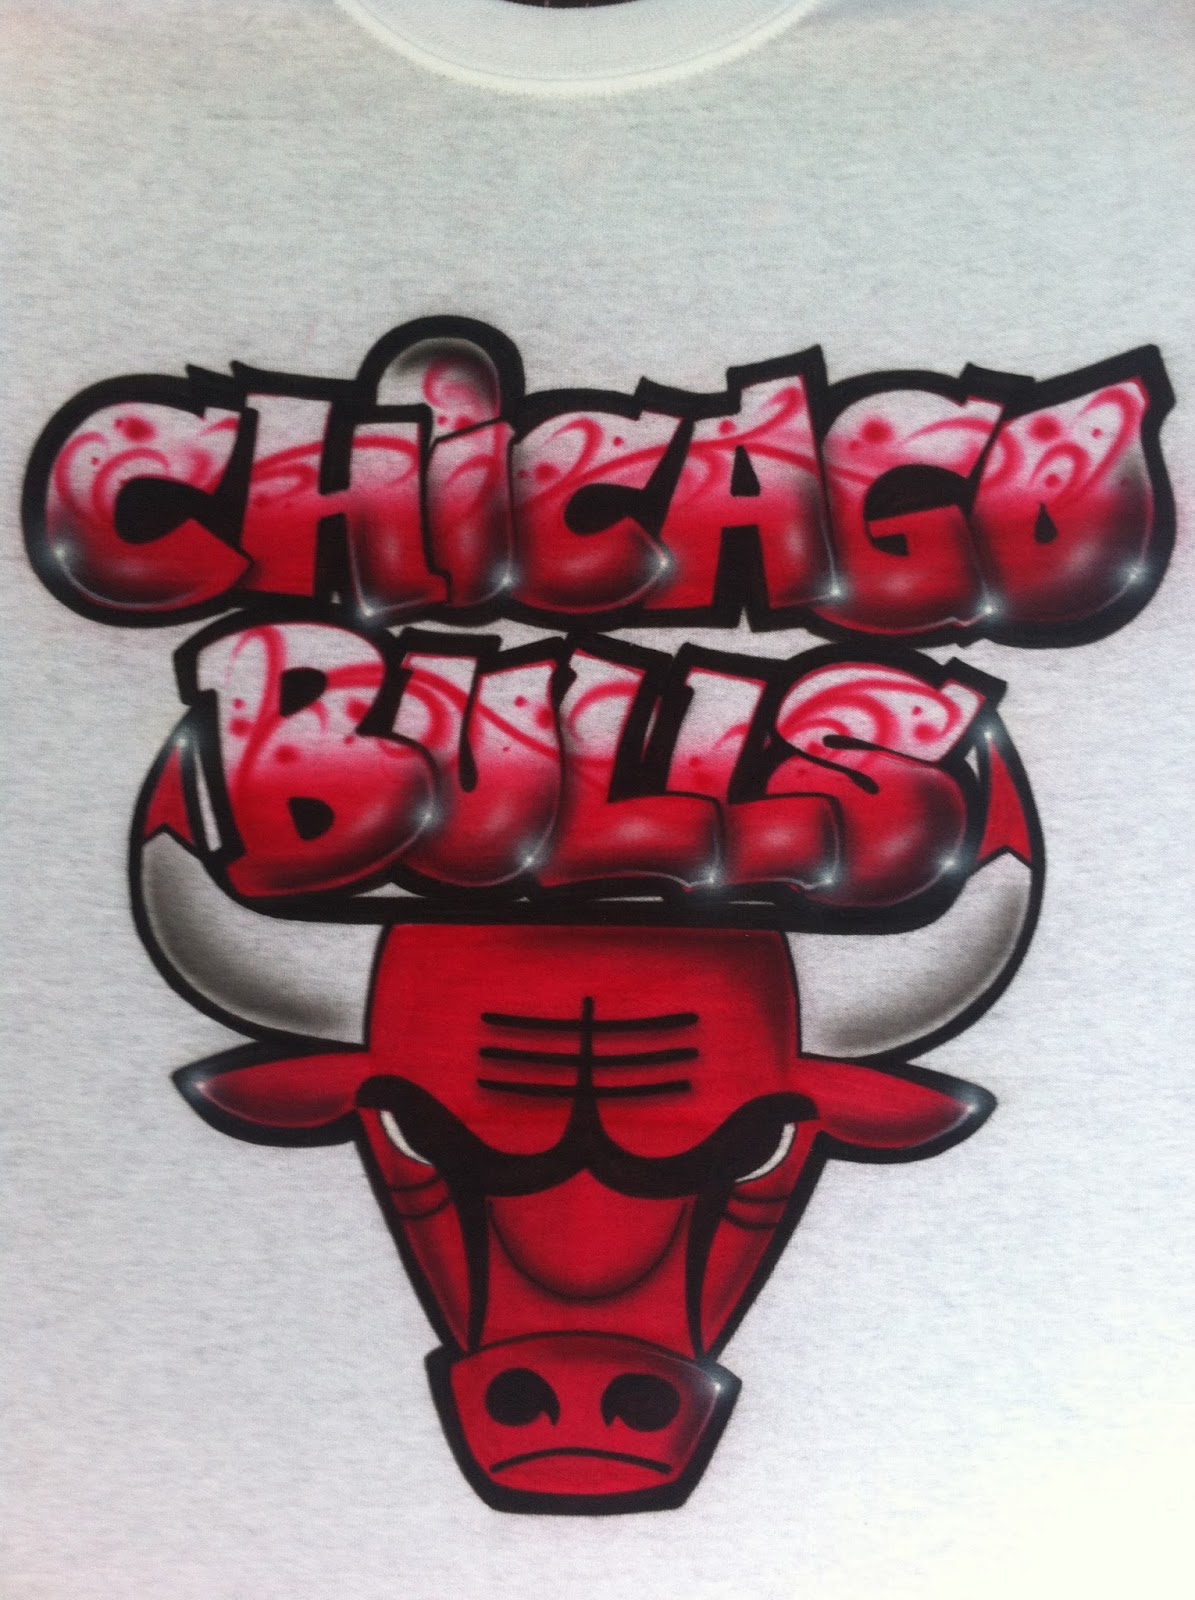 Chicago Bulls Sketch at Explore collection of